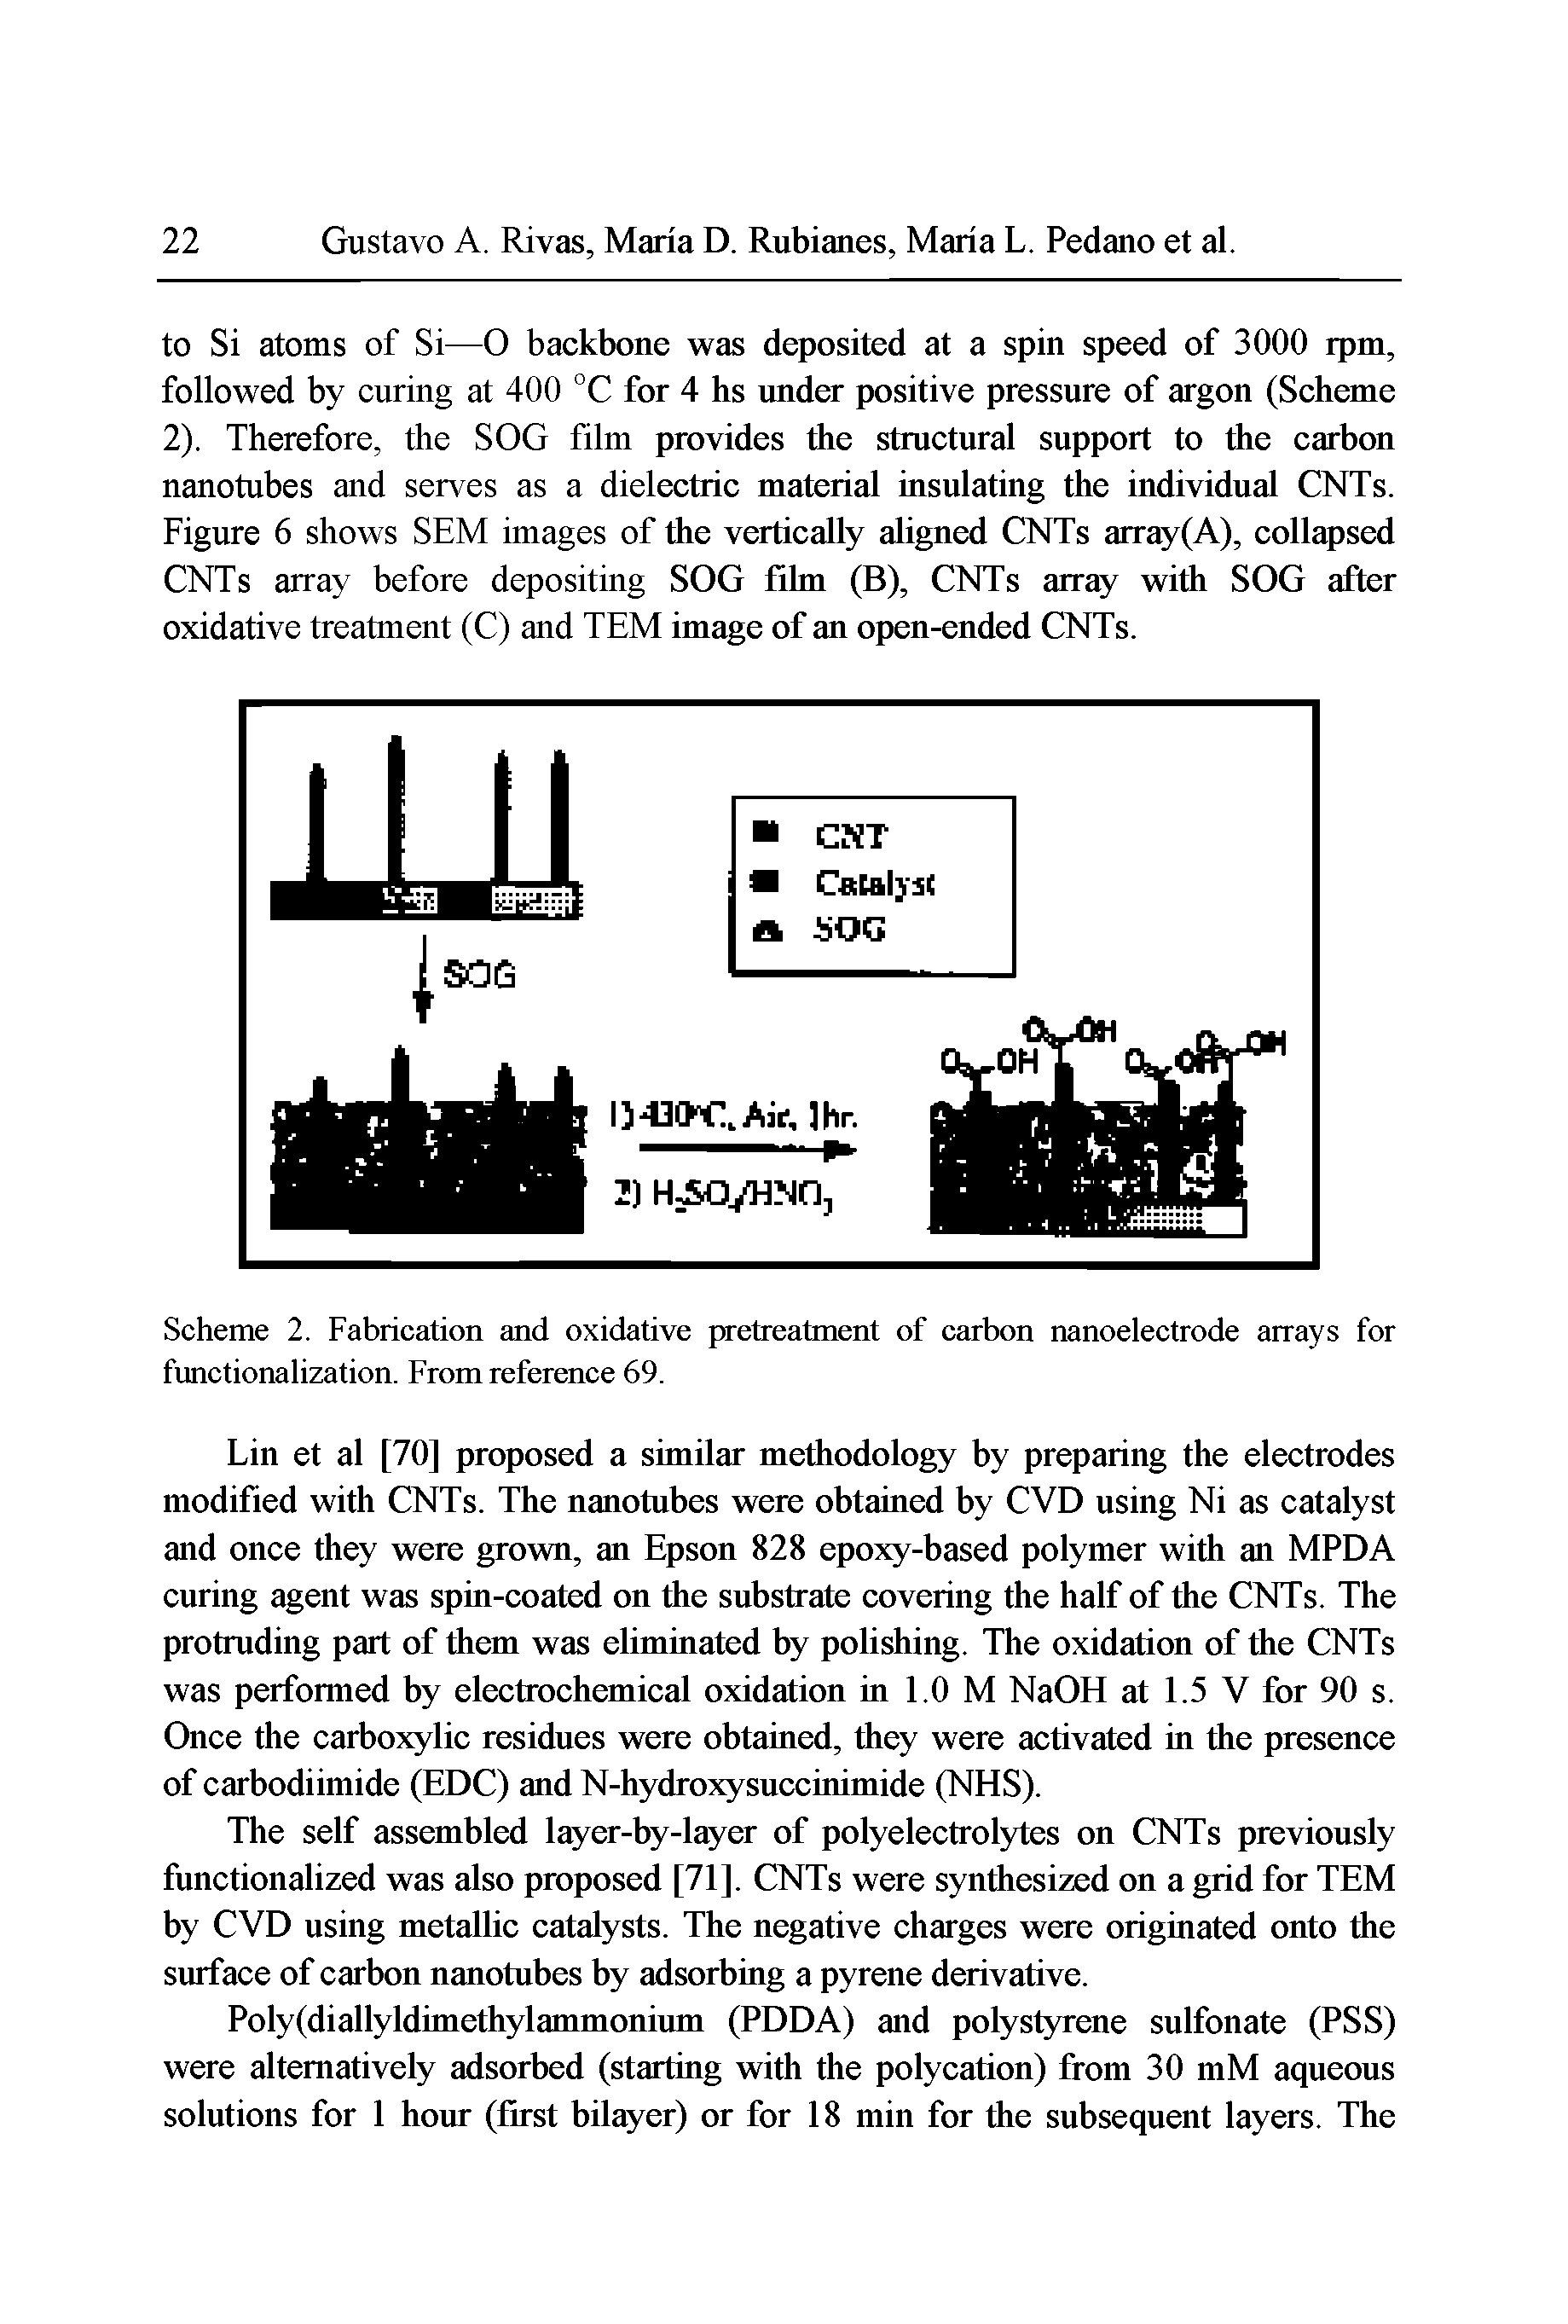 Scheme 2. Fabrication and oxidative pretreatment of carbon nanoelectrode arrays for functionalization. From reference 69.